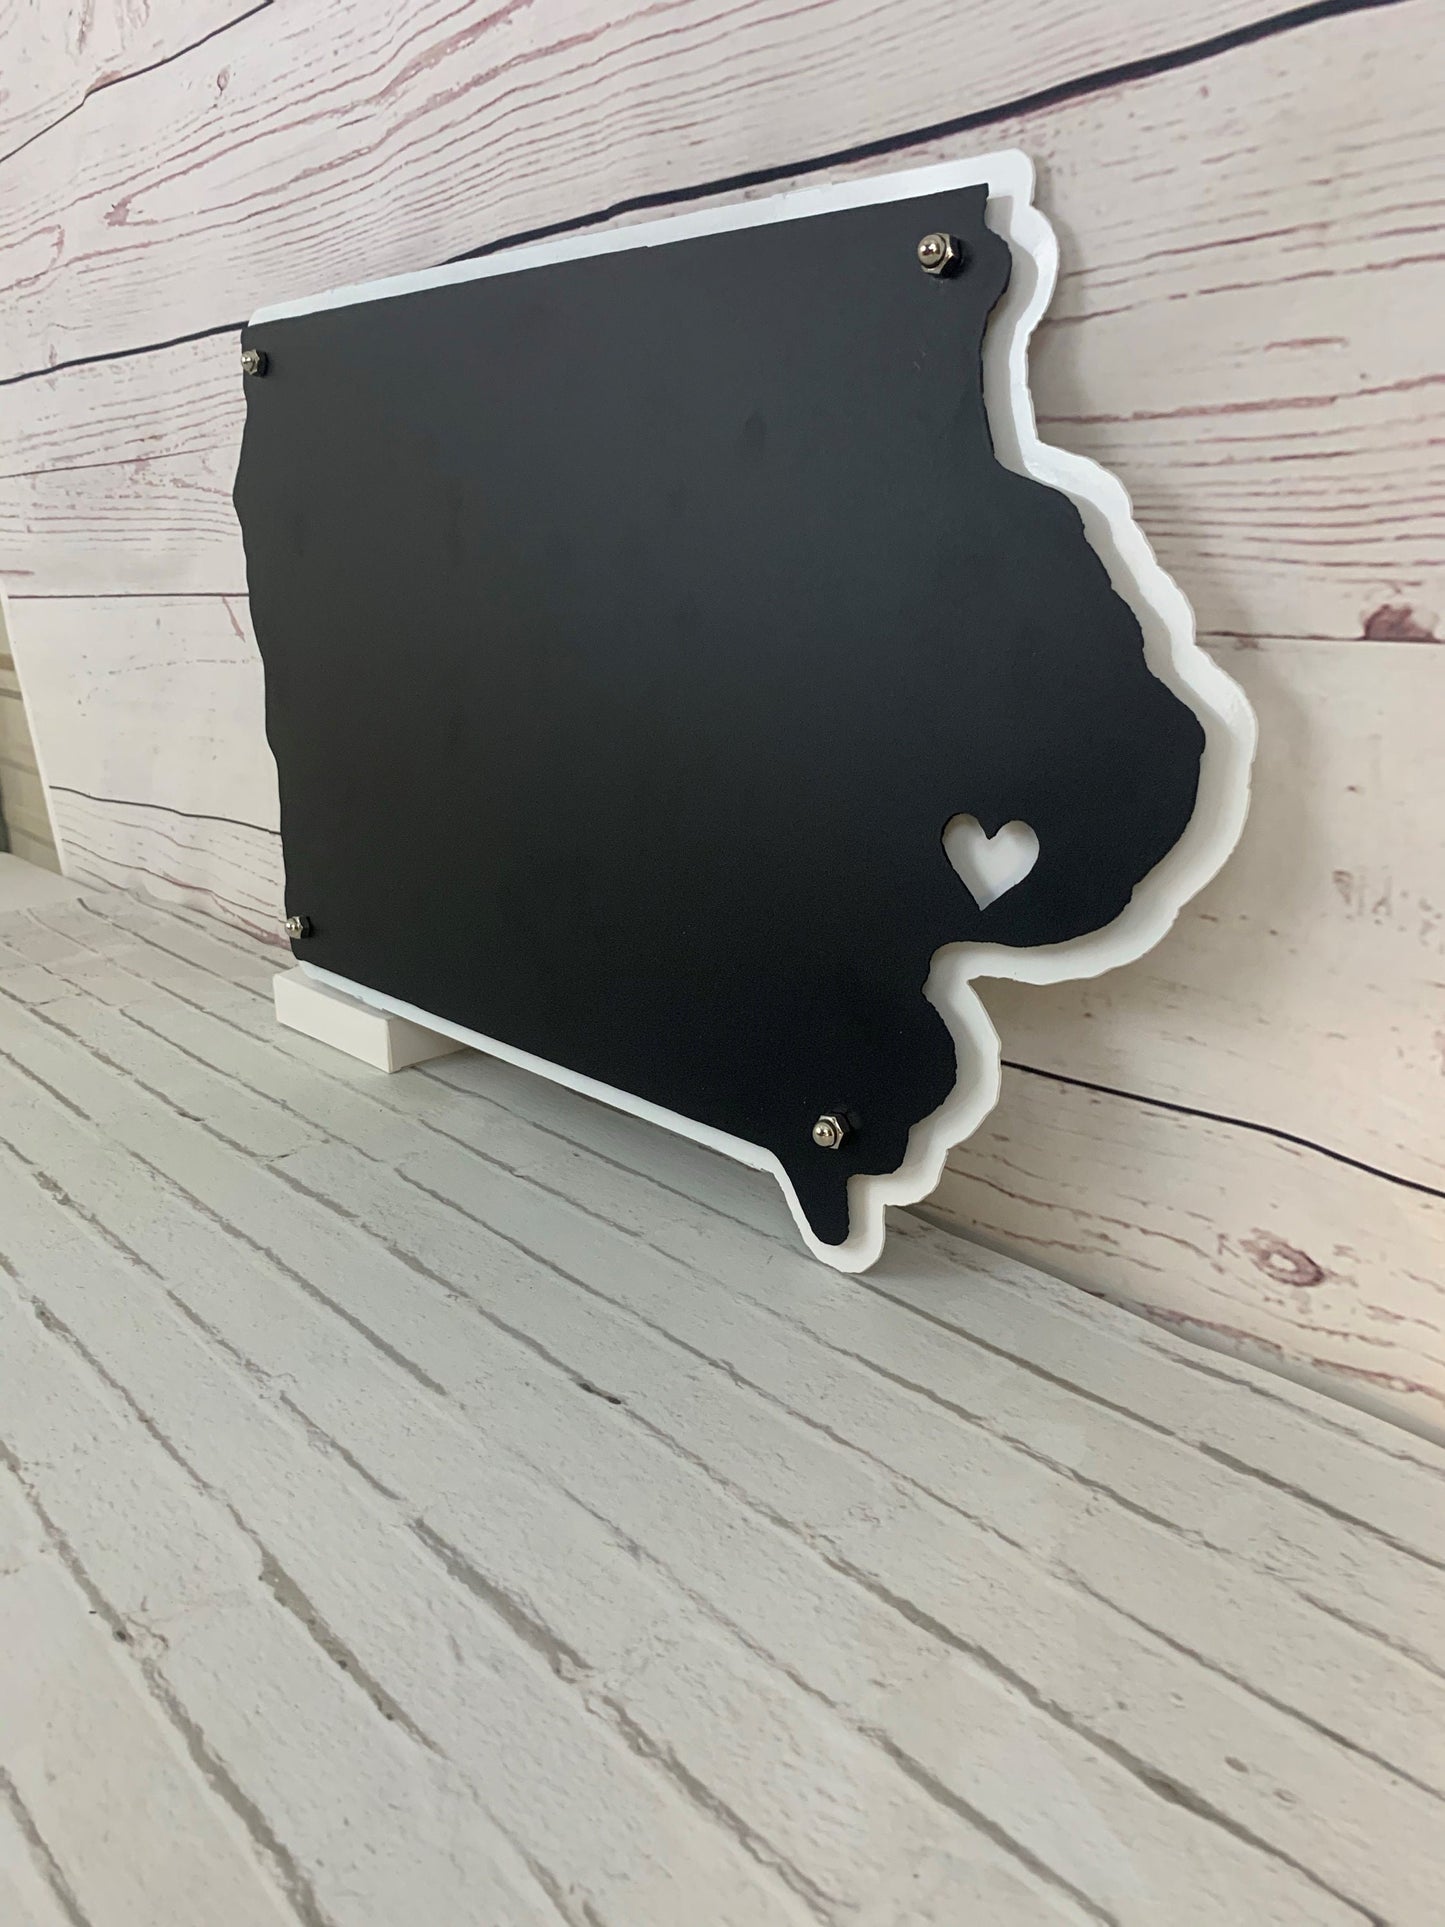 Iowa Shaped Sign with Heart On Location